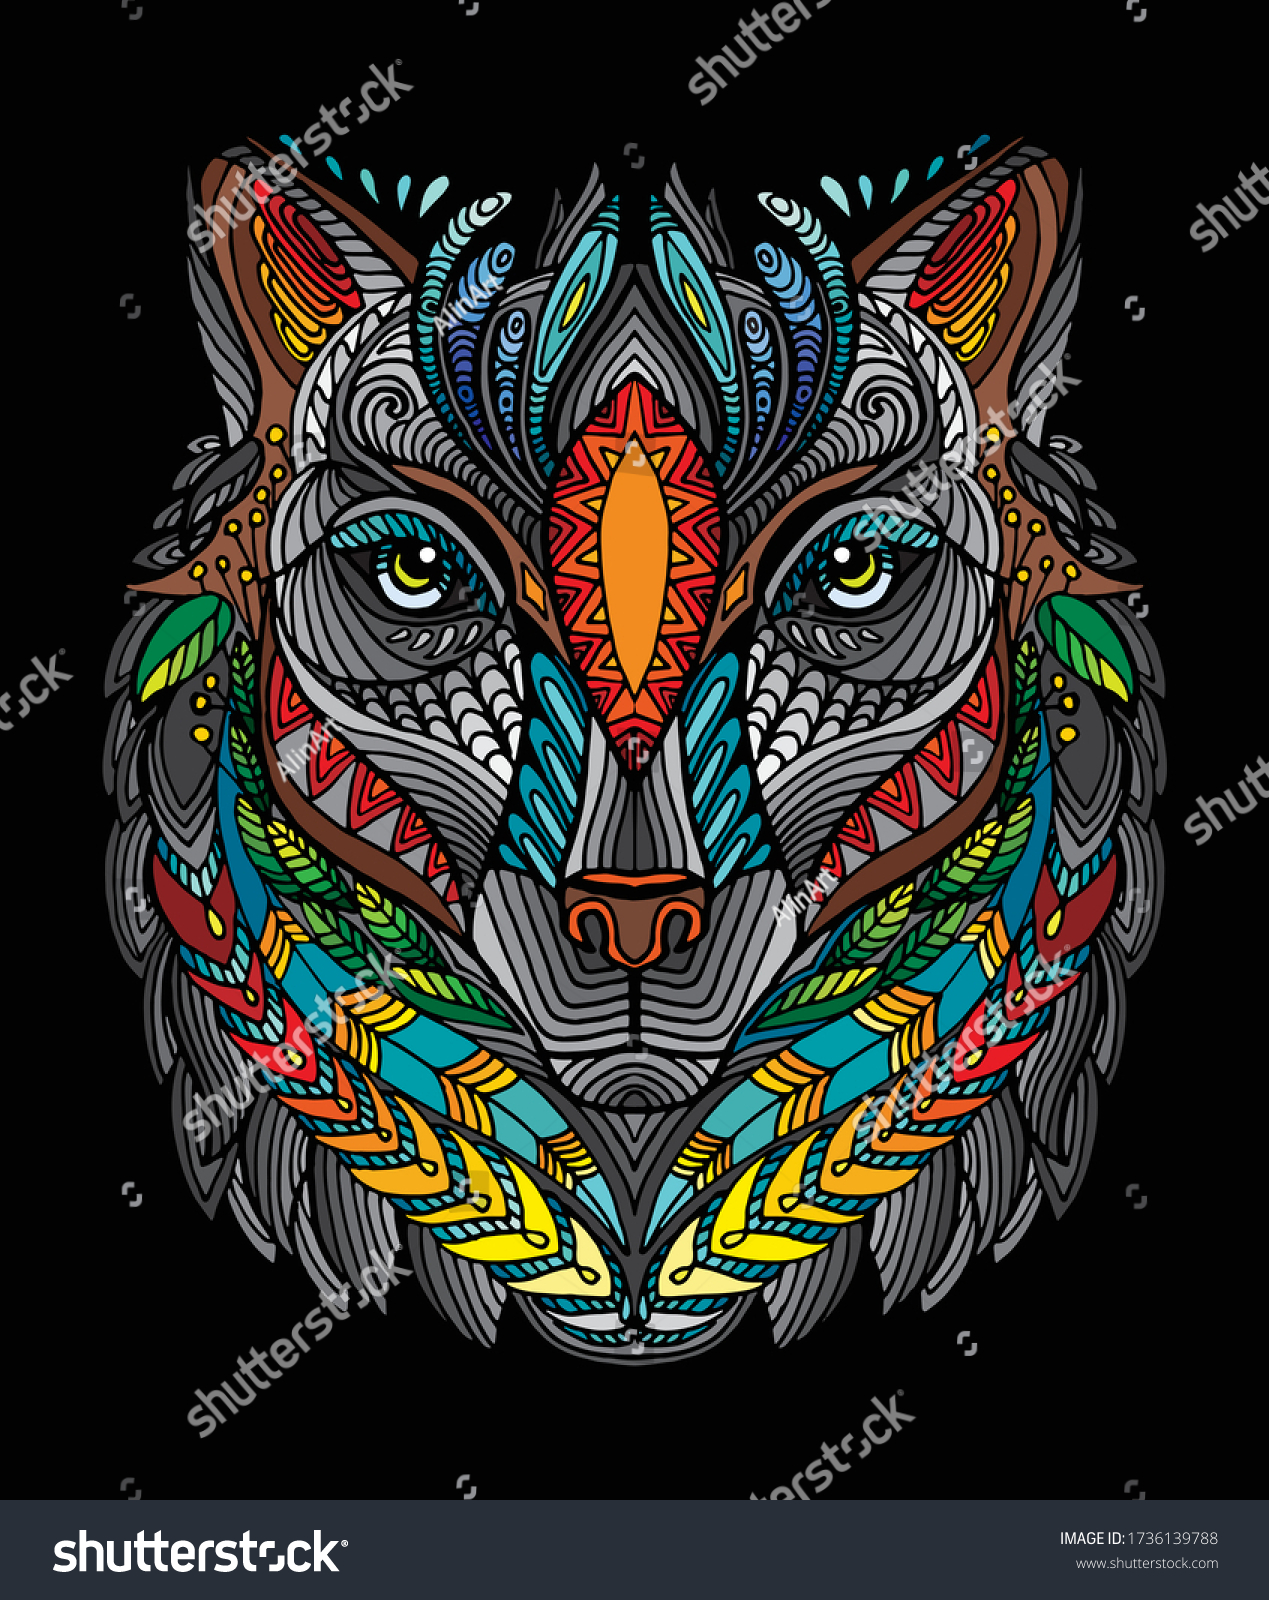 SVG of Vector decorative doodle ornamental head of wolf. Abstract vector colorful illustration of wolf head isolated on black background. Stock illustration for print, design and tattoo.  svg